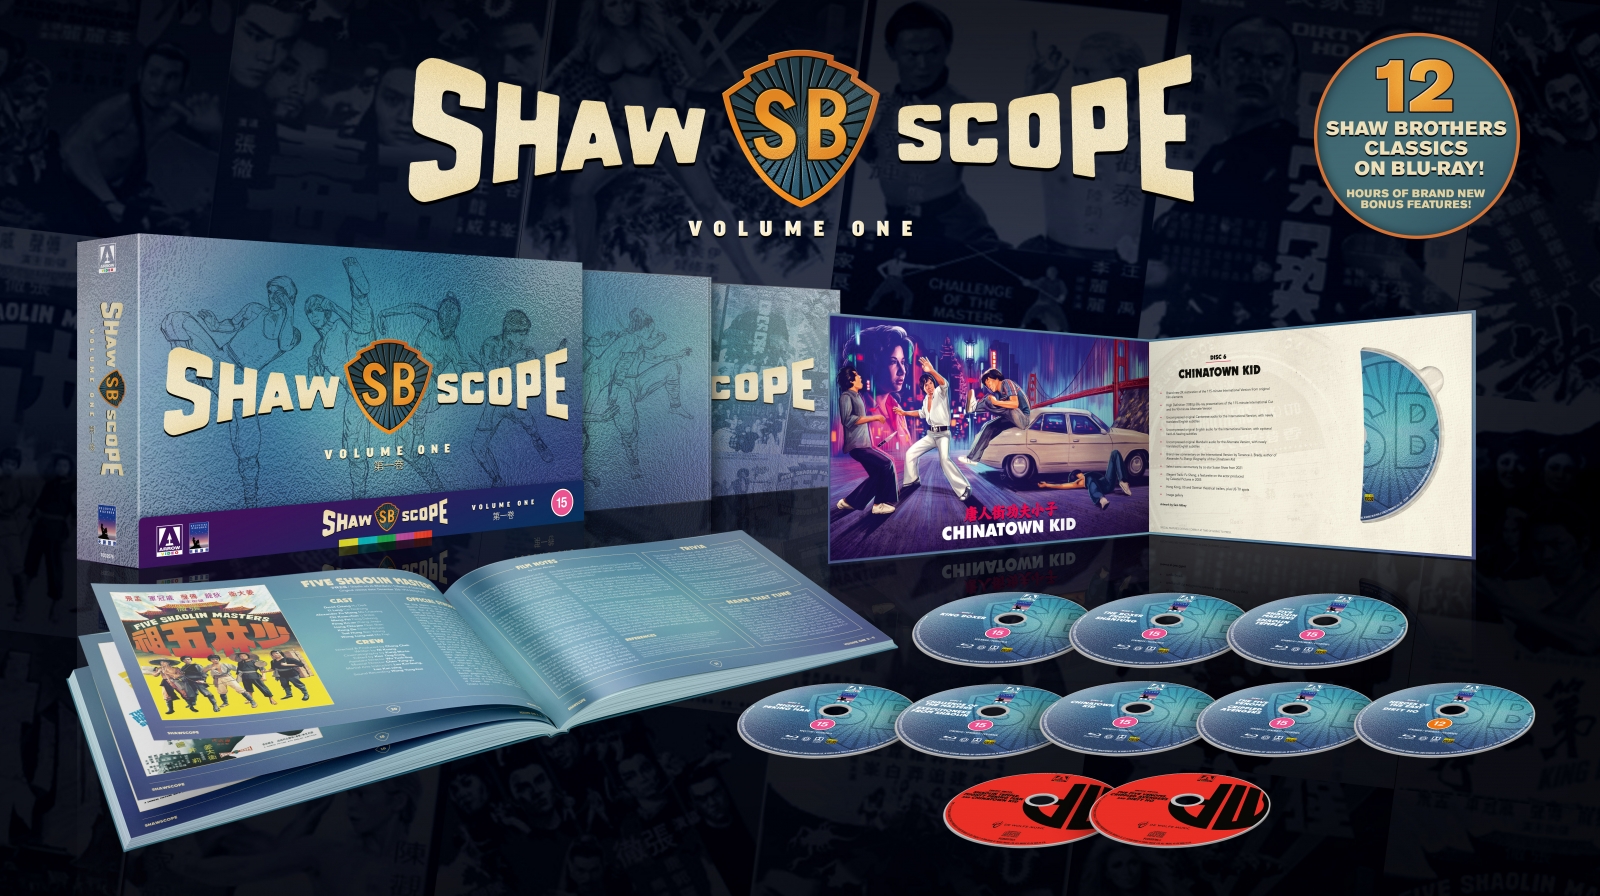 Exclusive artwork reveal for Arrow Video's Shawscope Volume One Shaw  Brothers Blu-ray box set